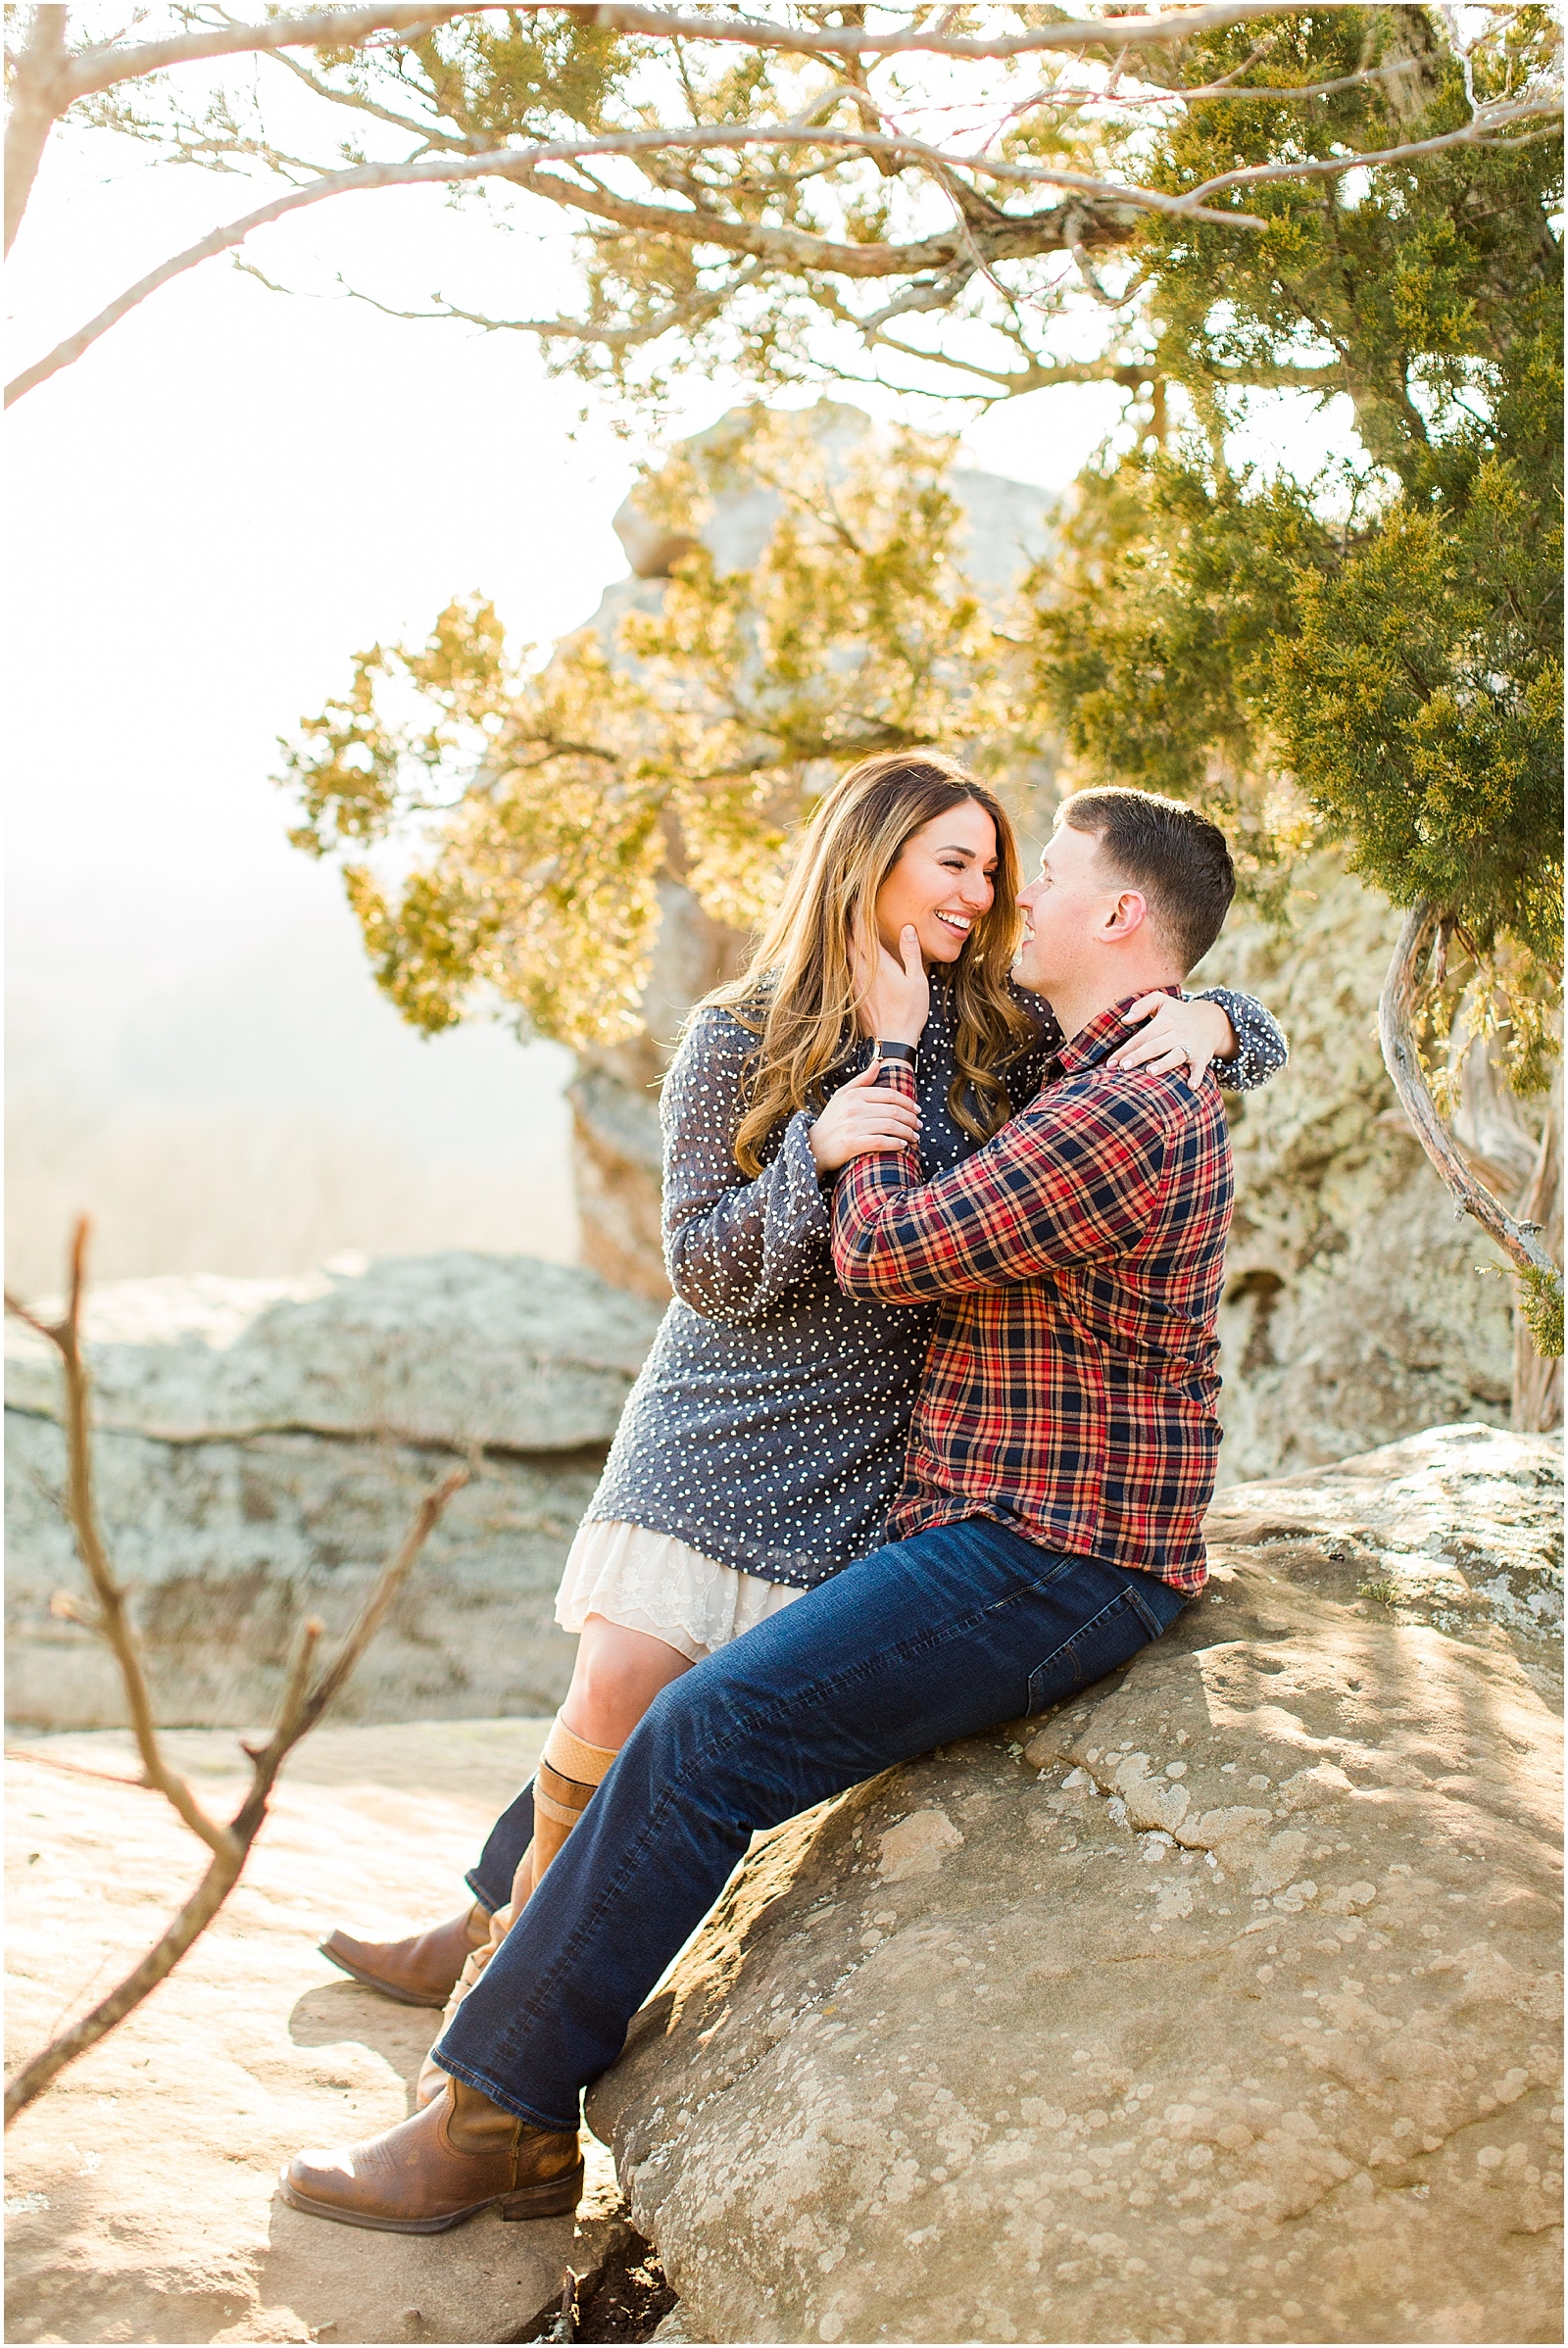 A Sunny Garden of the Gods Engagement Session | Shiloh and Lee | Bret and Brandie Photography020.jpg